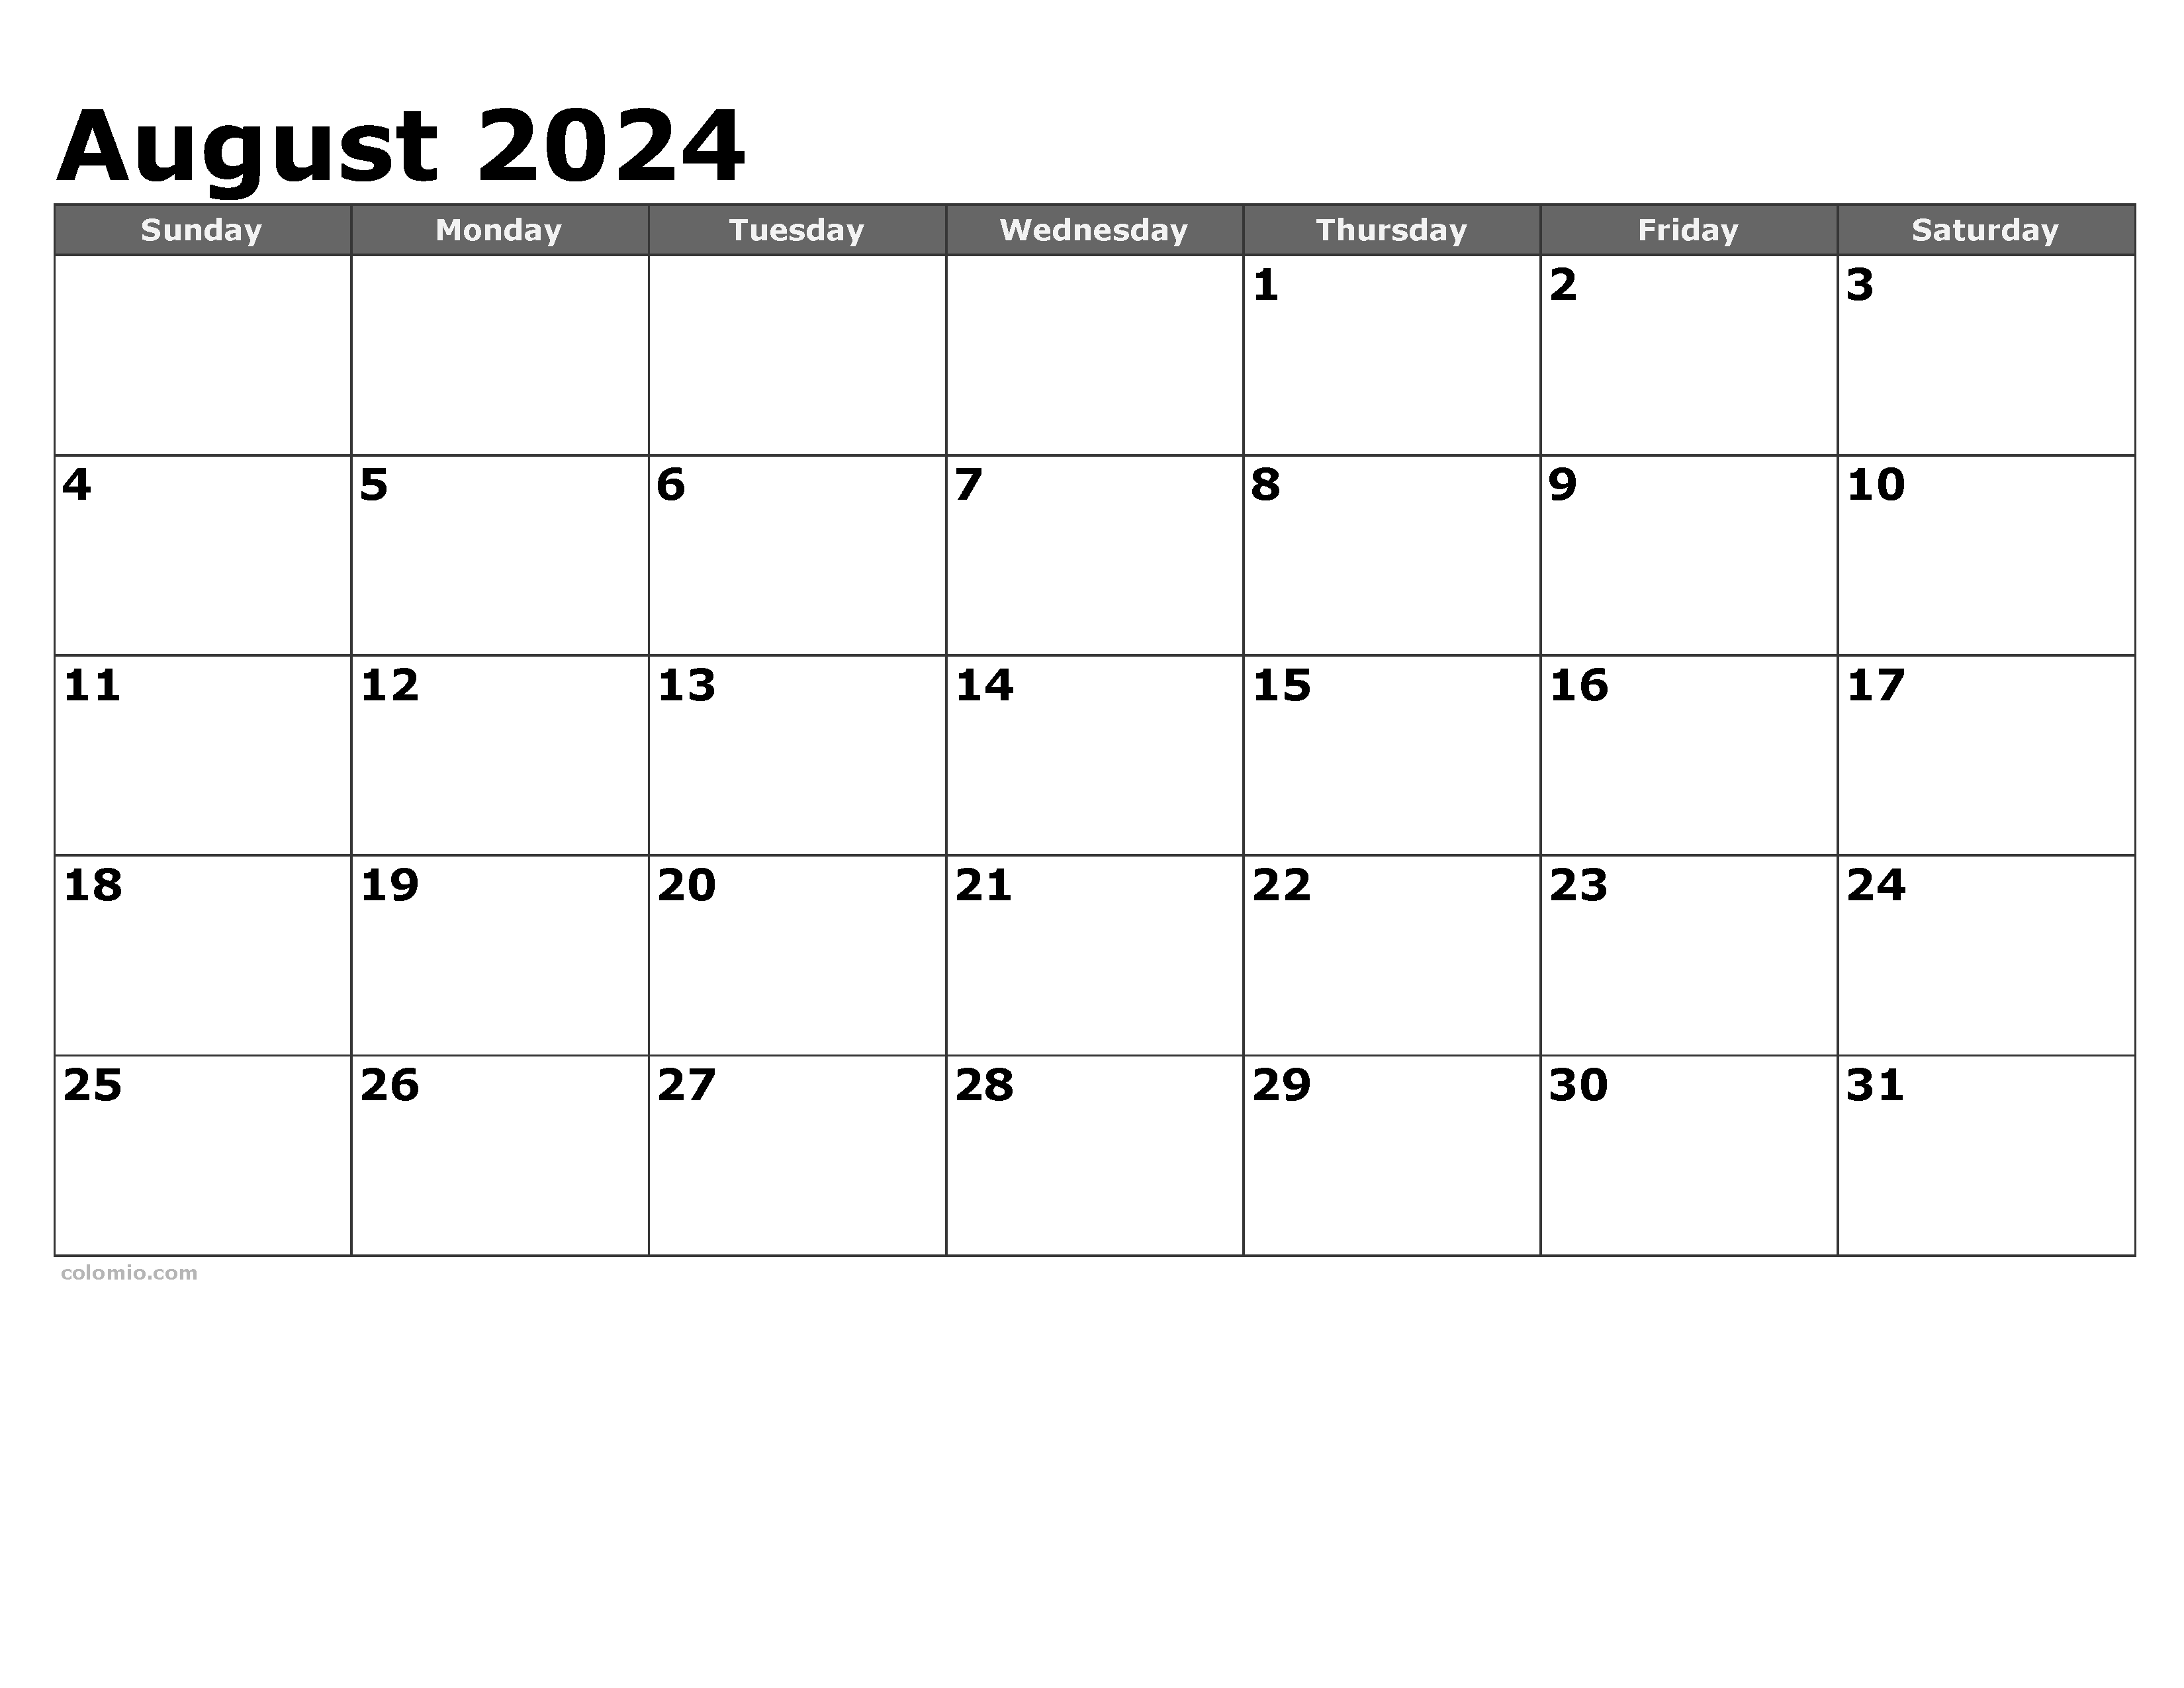 August 2024 Calendar | Free Printable Pdf, Xls And Png with regard to Free Printable Black And White Calendar Aug 2024